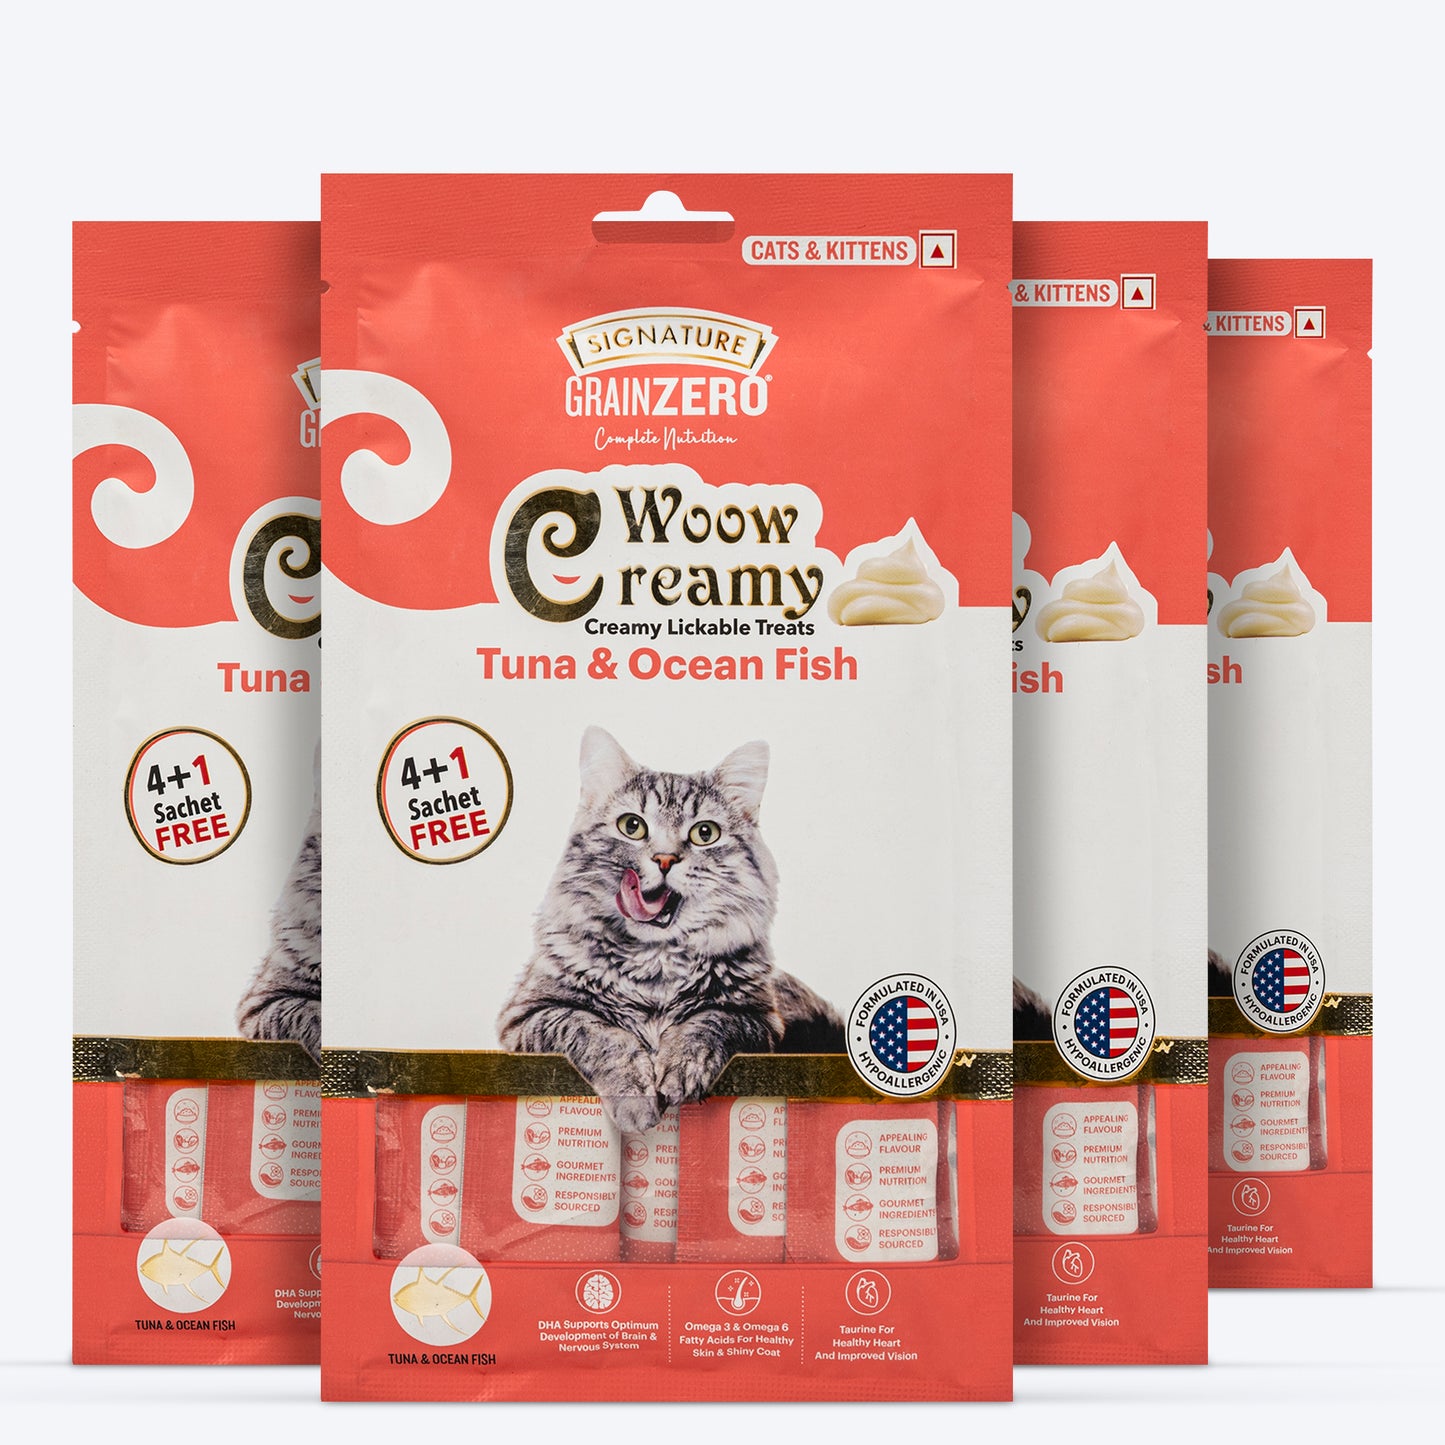 Signature Grain Zero Woow Creamy Tuna & Ocean Fish Lickable Treats For Cat & Kitten - 75 g - Heads Up For Tails